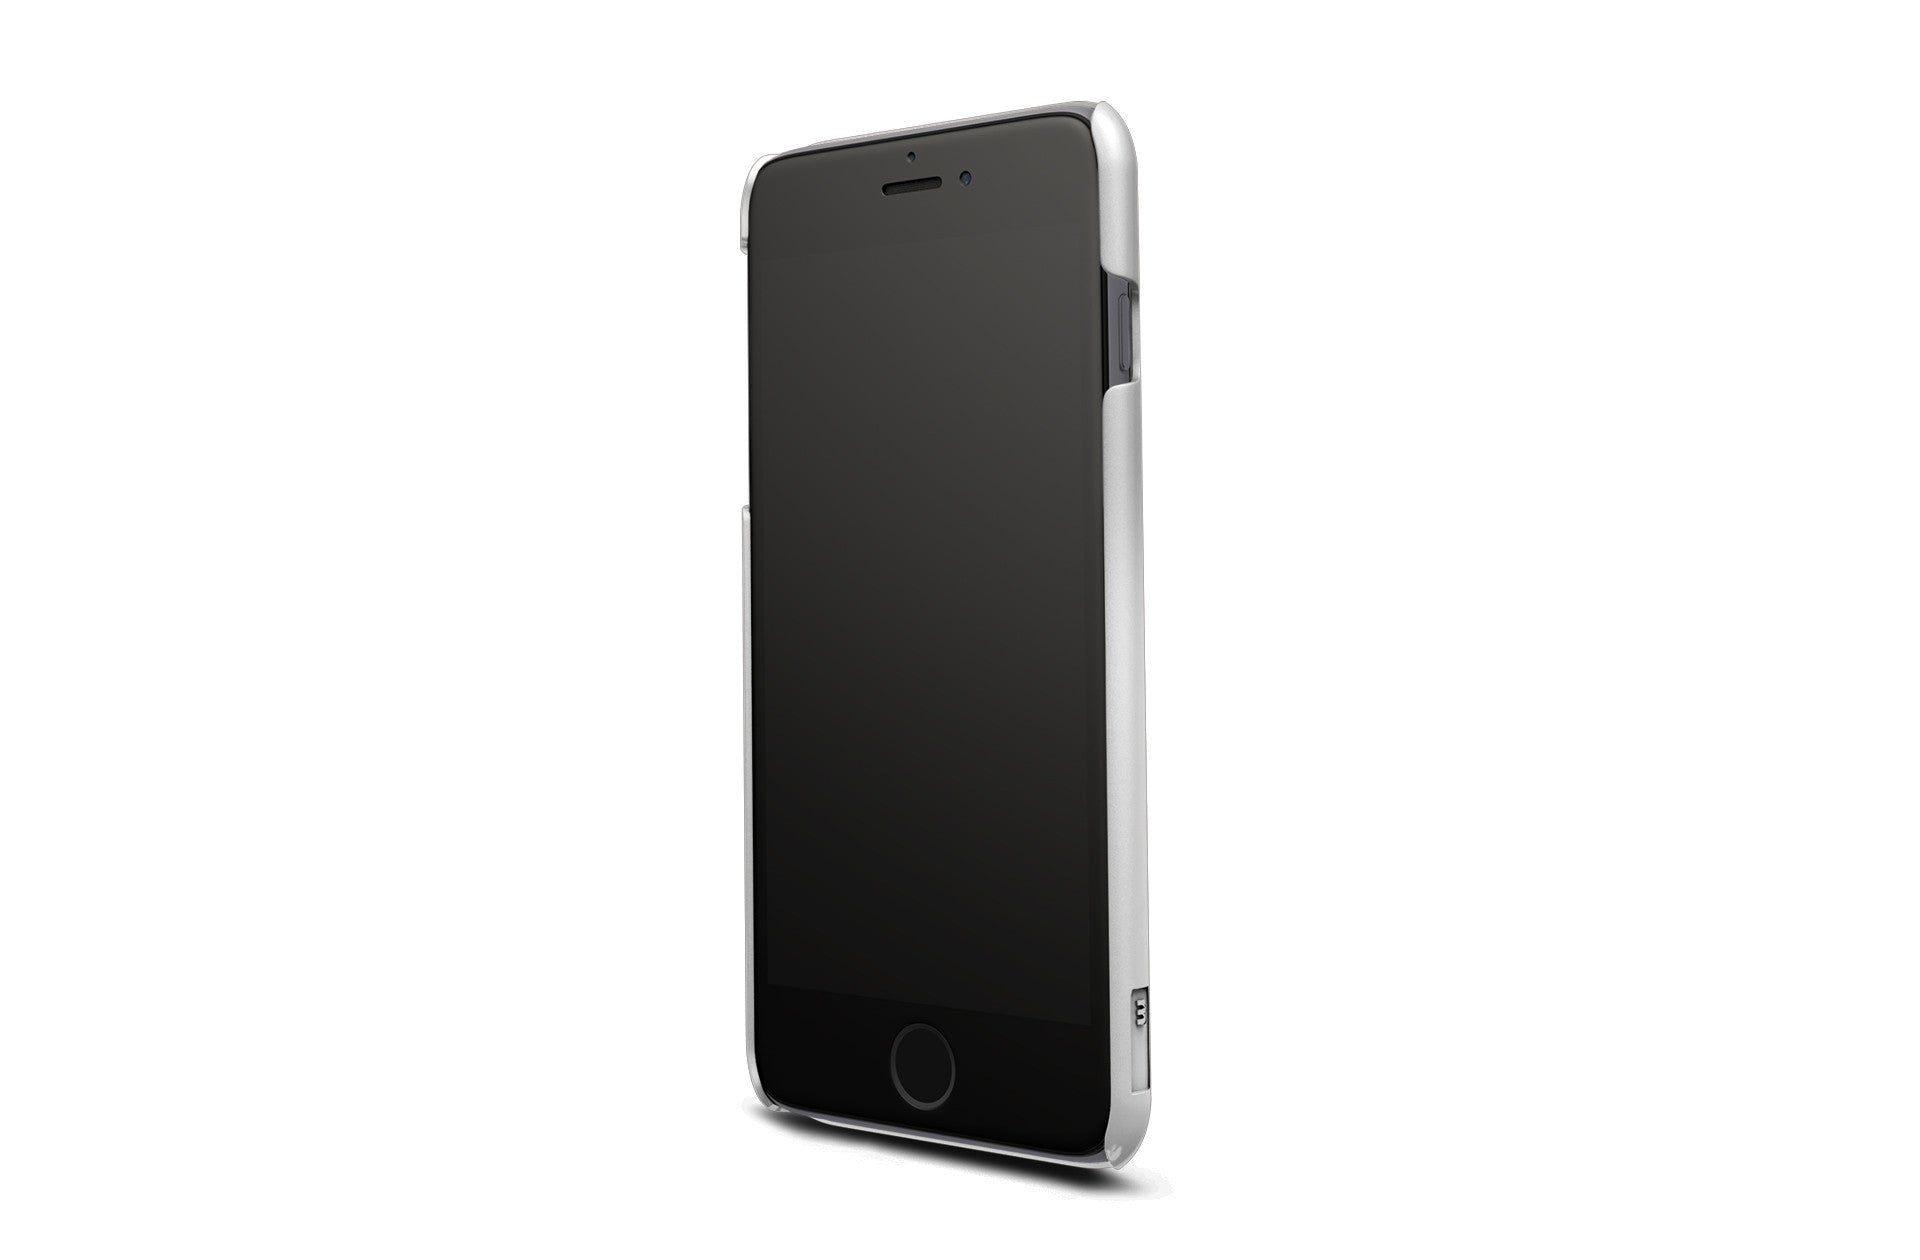 ThreeDCase 3D Molded from Premium Polycarbonate Composite for iPhone 6/6S